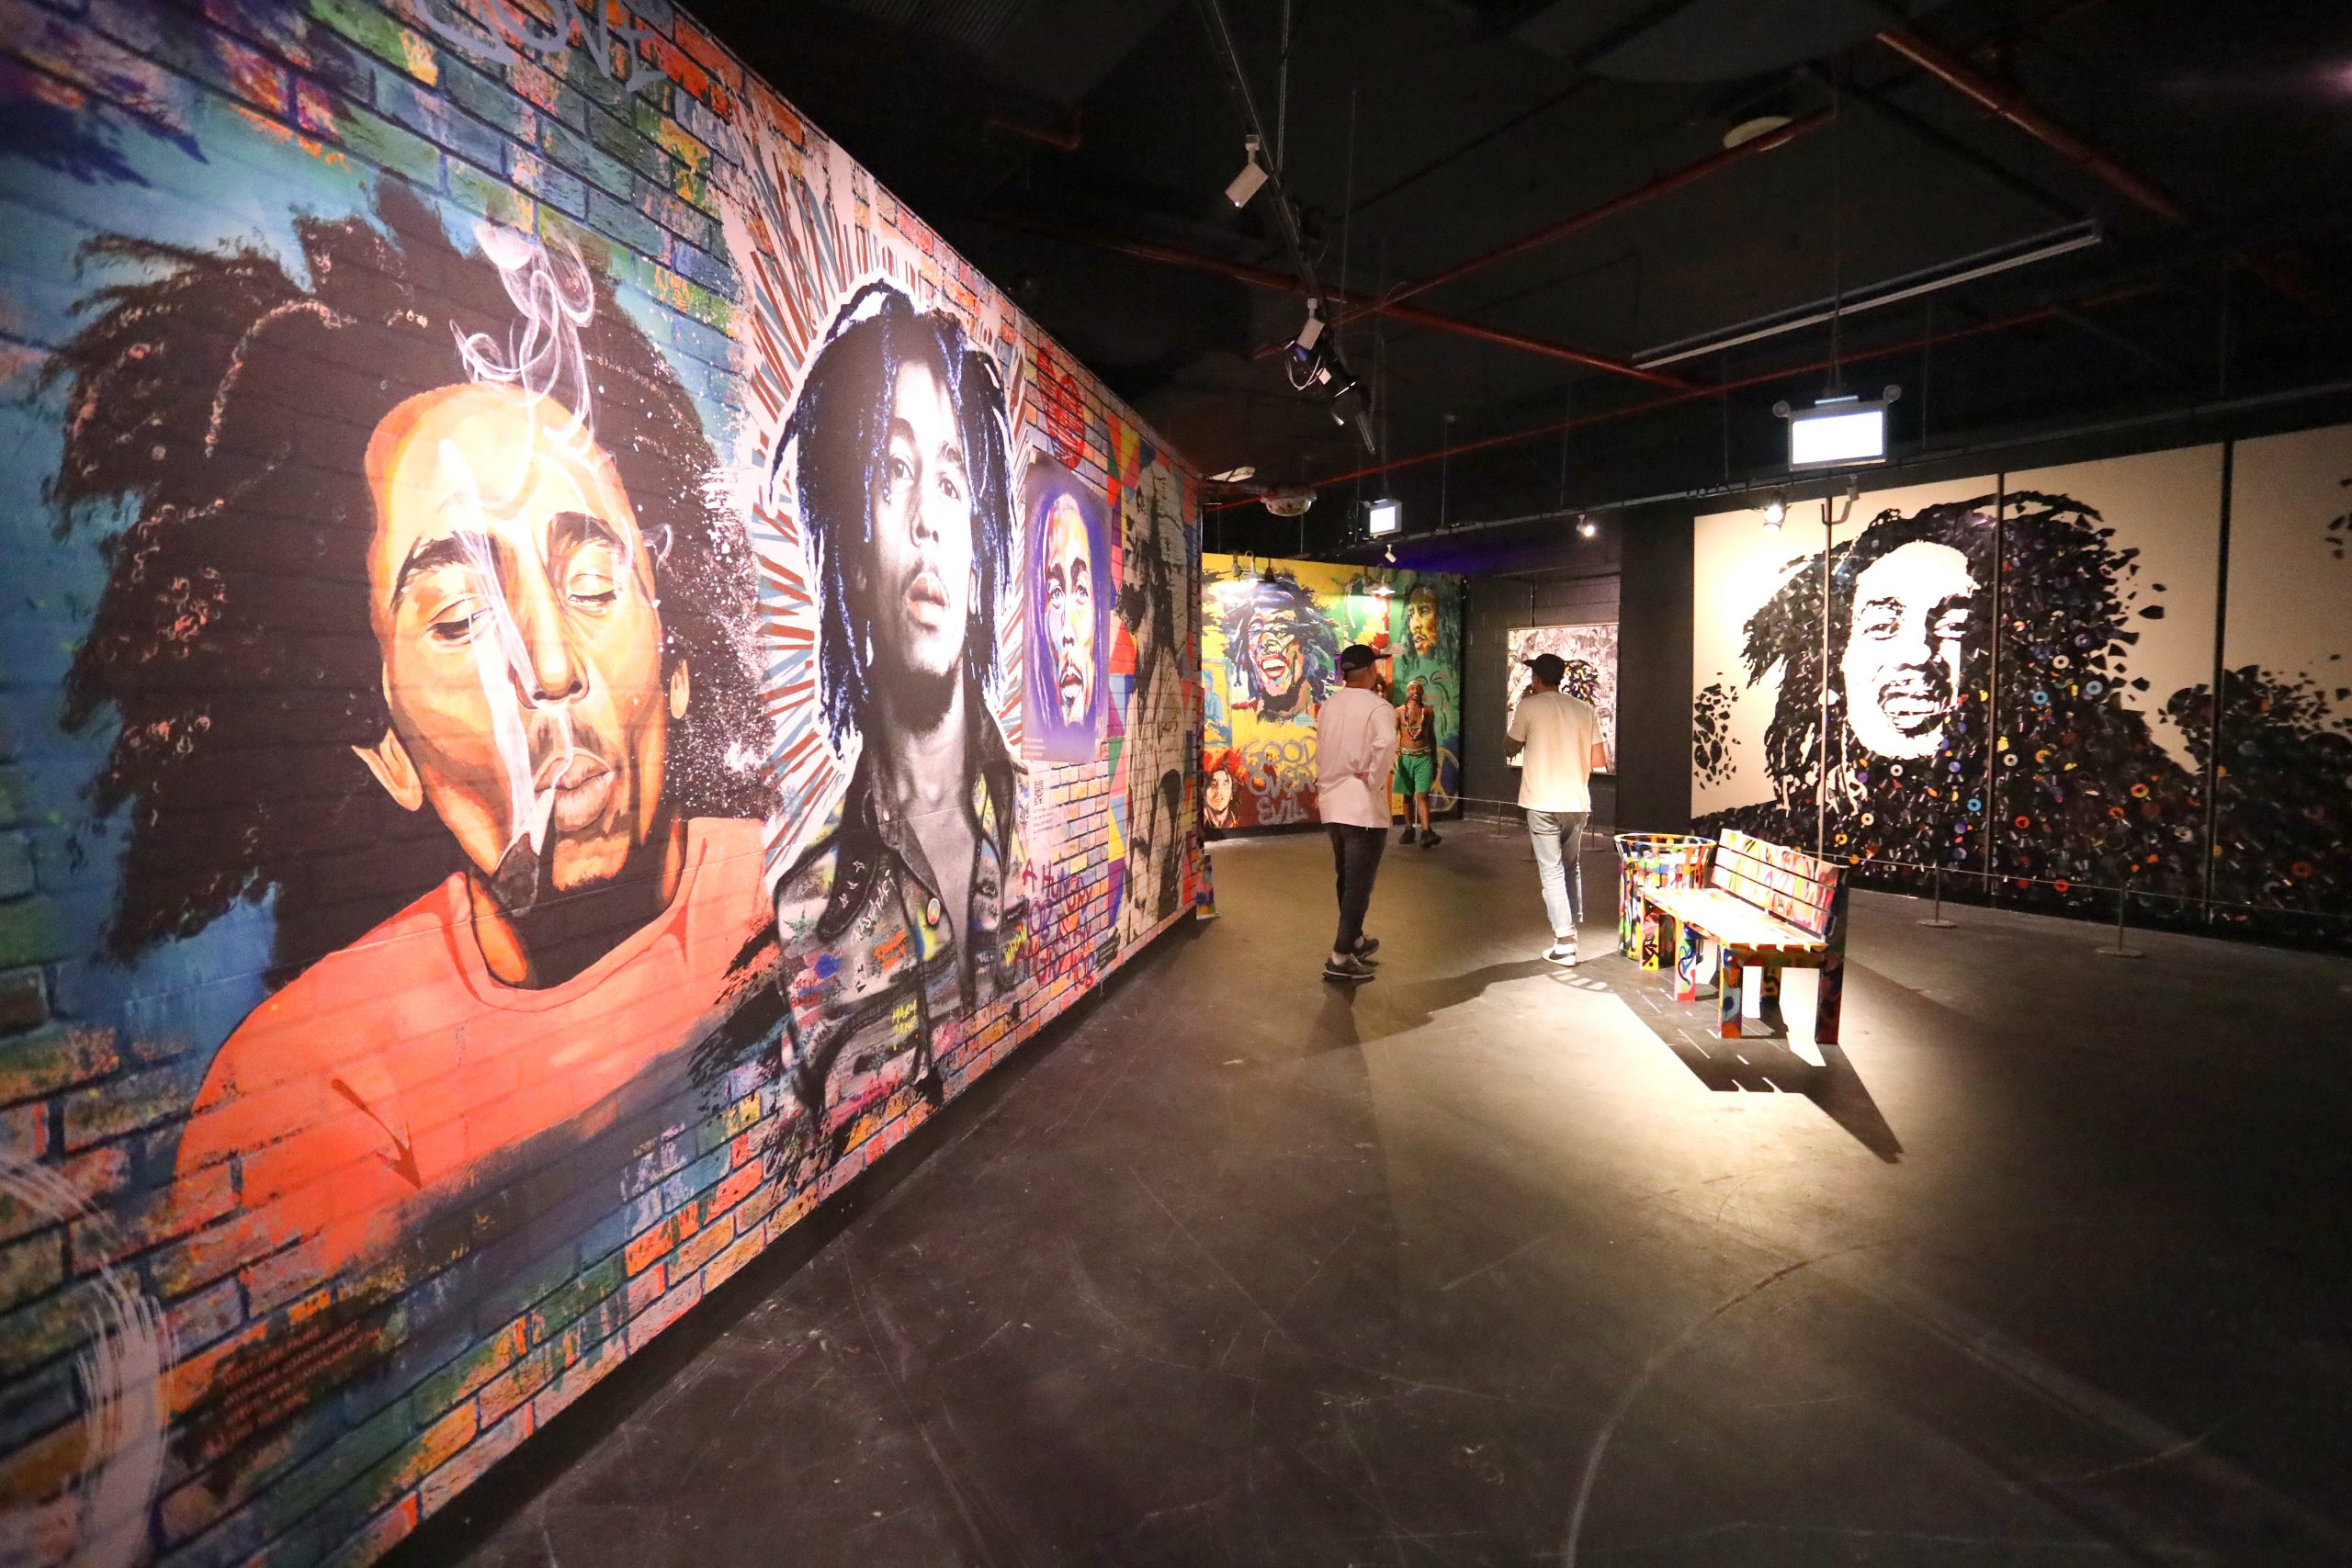 Bob Marley's 'One Love Experience' Exhibit to Open in Los Angeles